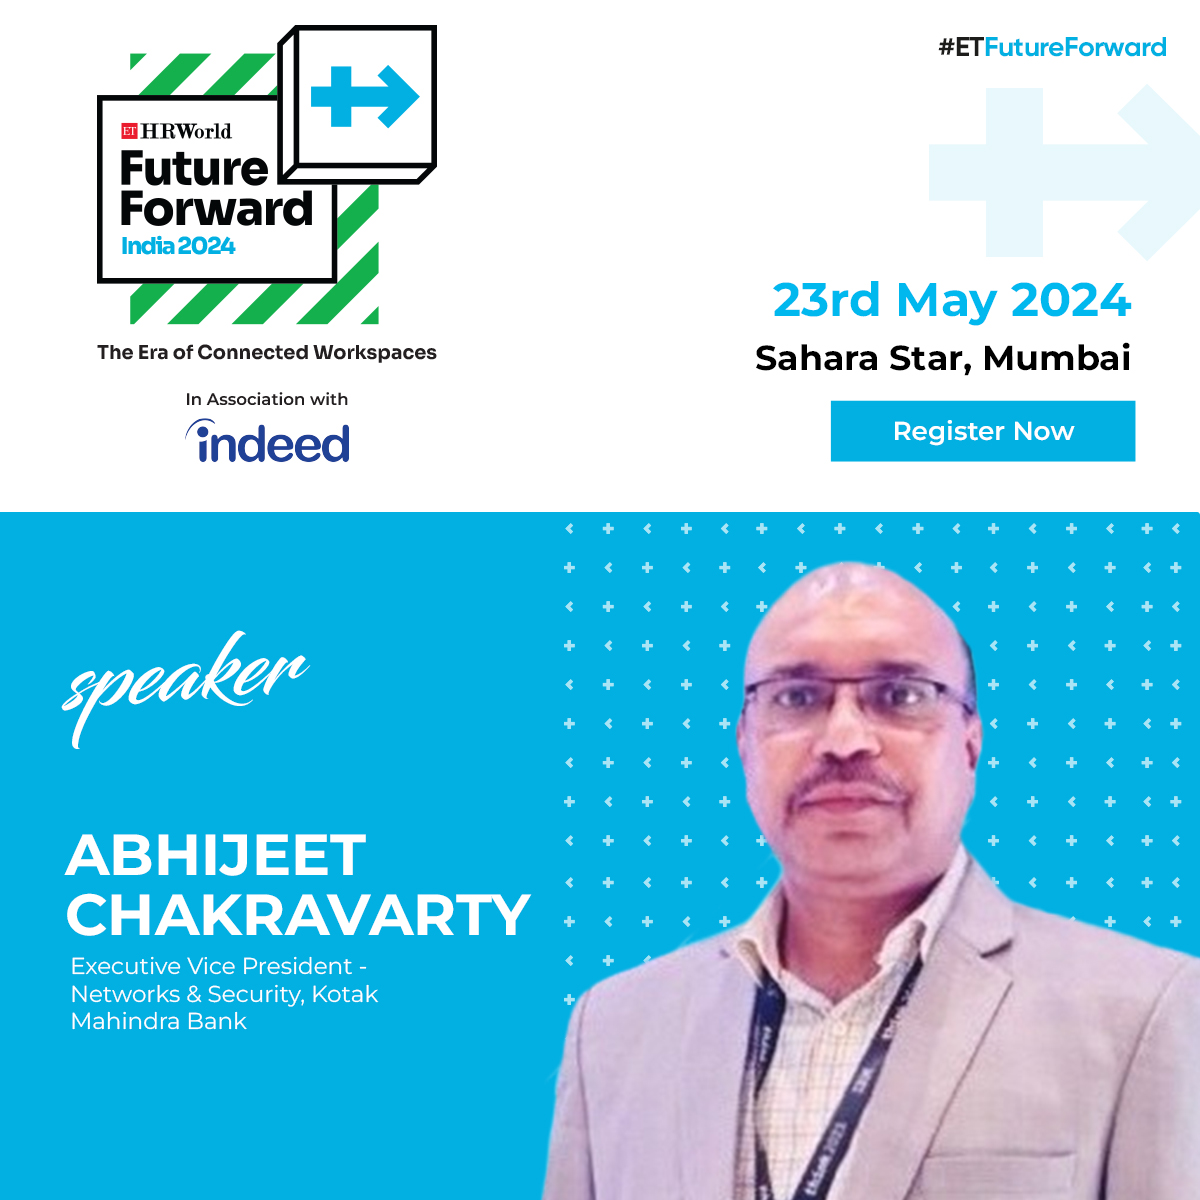 We're honored to have Abhijit Chakravarty, Executive Vice President - Networks & Security, @KotakBankLtd at #ETFutureForward 2024!

Embark on an enlightening journey into the future of work with us!

Register Now: bit.ly/49oakZp

#ETHRWorld #Summit #HR #HRLeaders